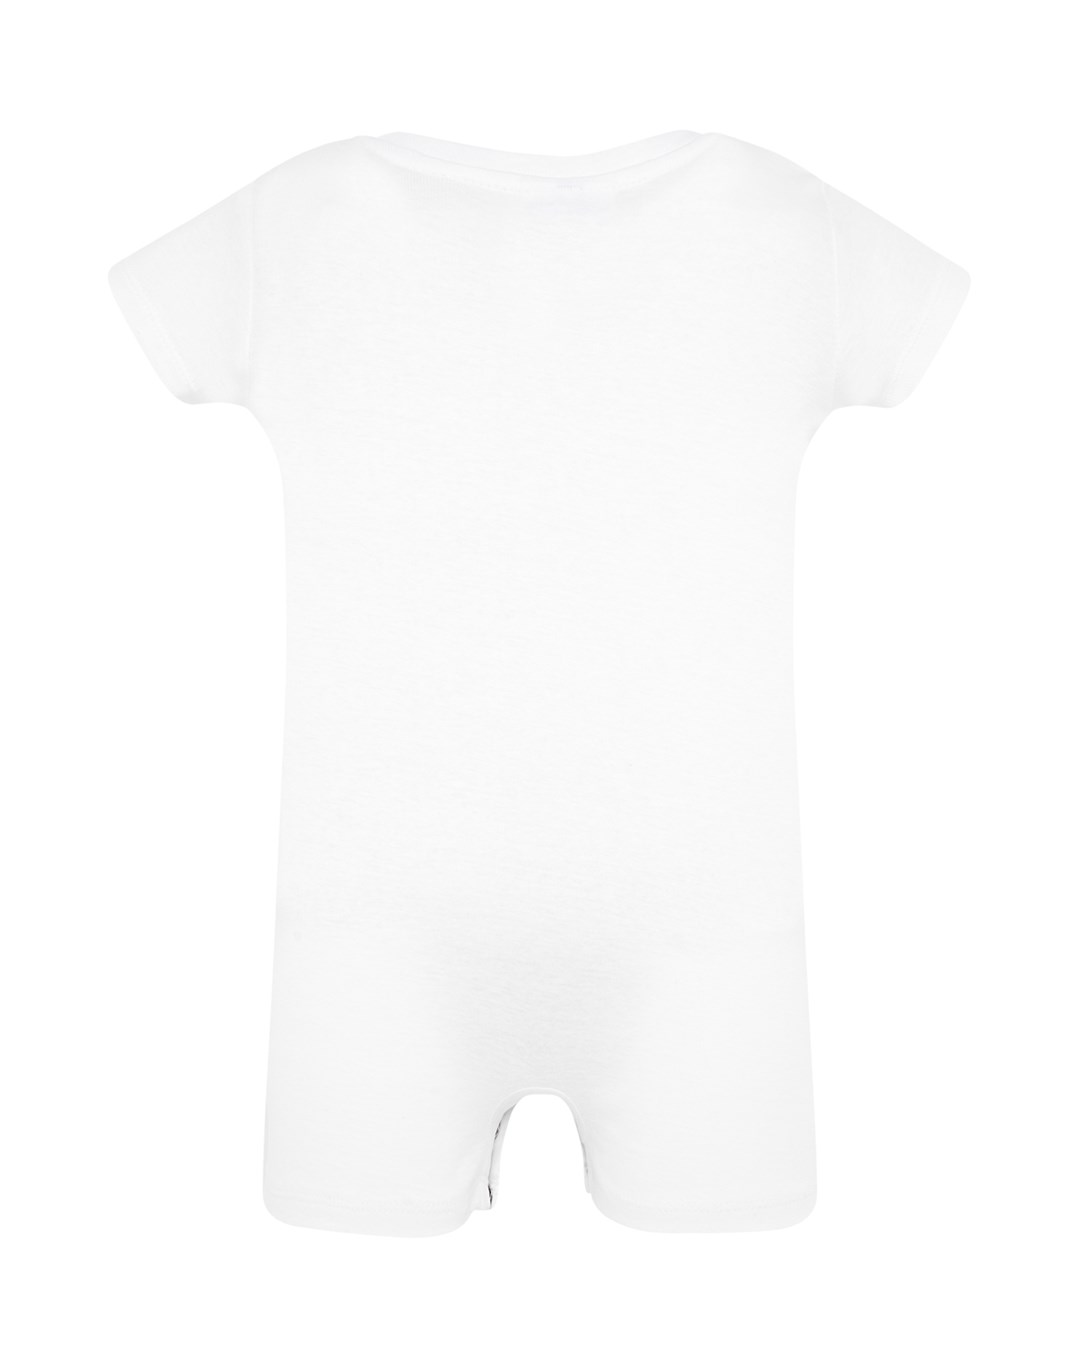 Baby body for printing